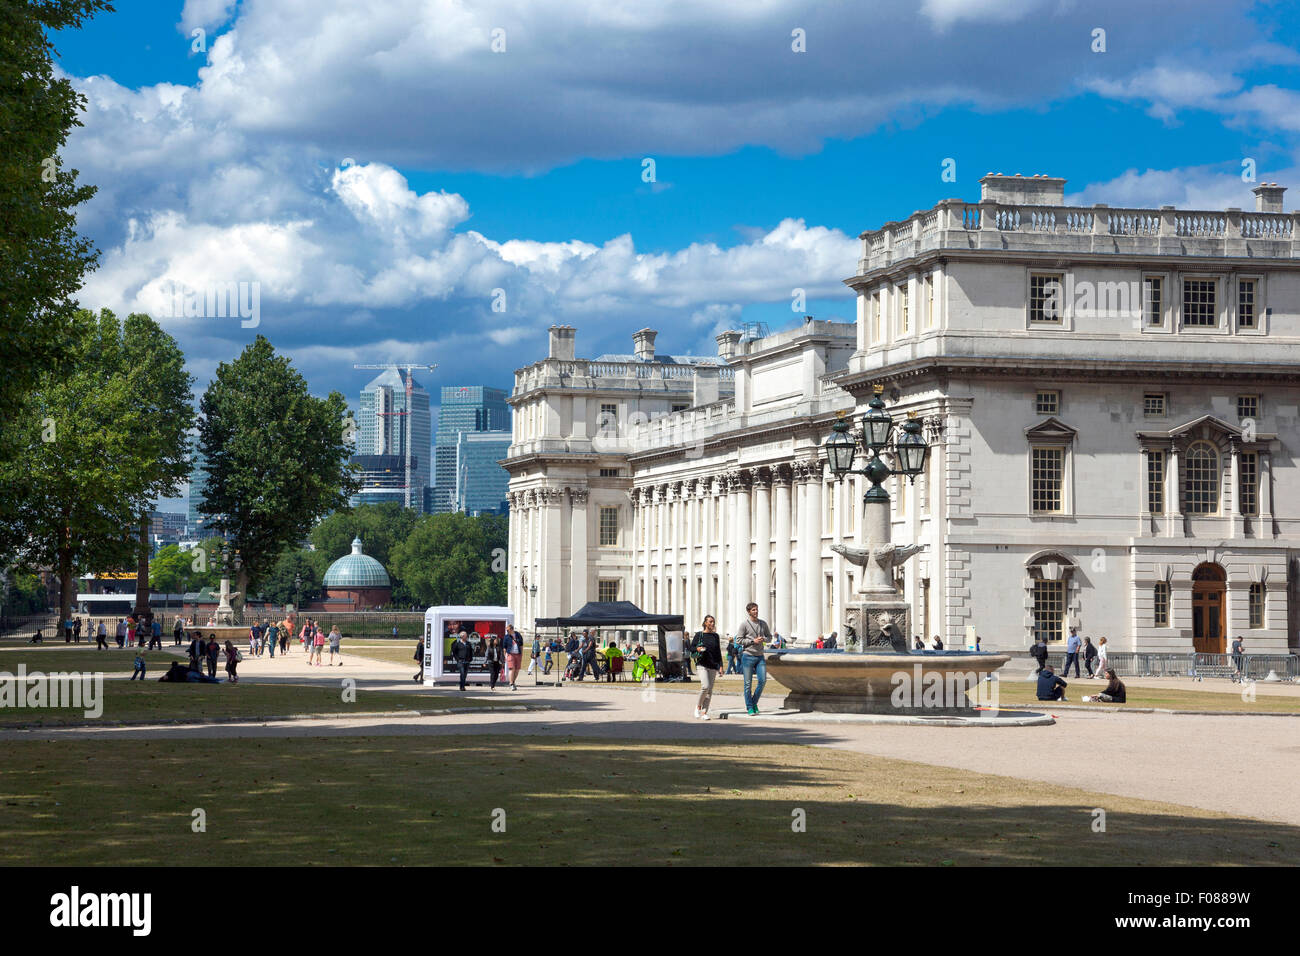 Old Royal Naval College in Greenwich, London, UK Stockfoto